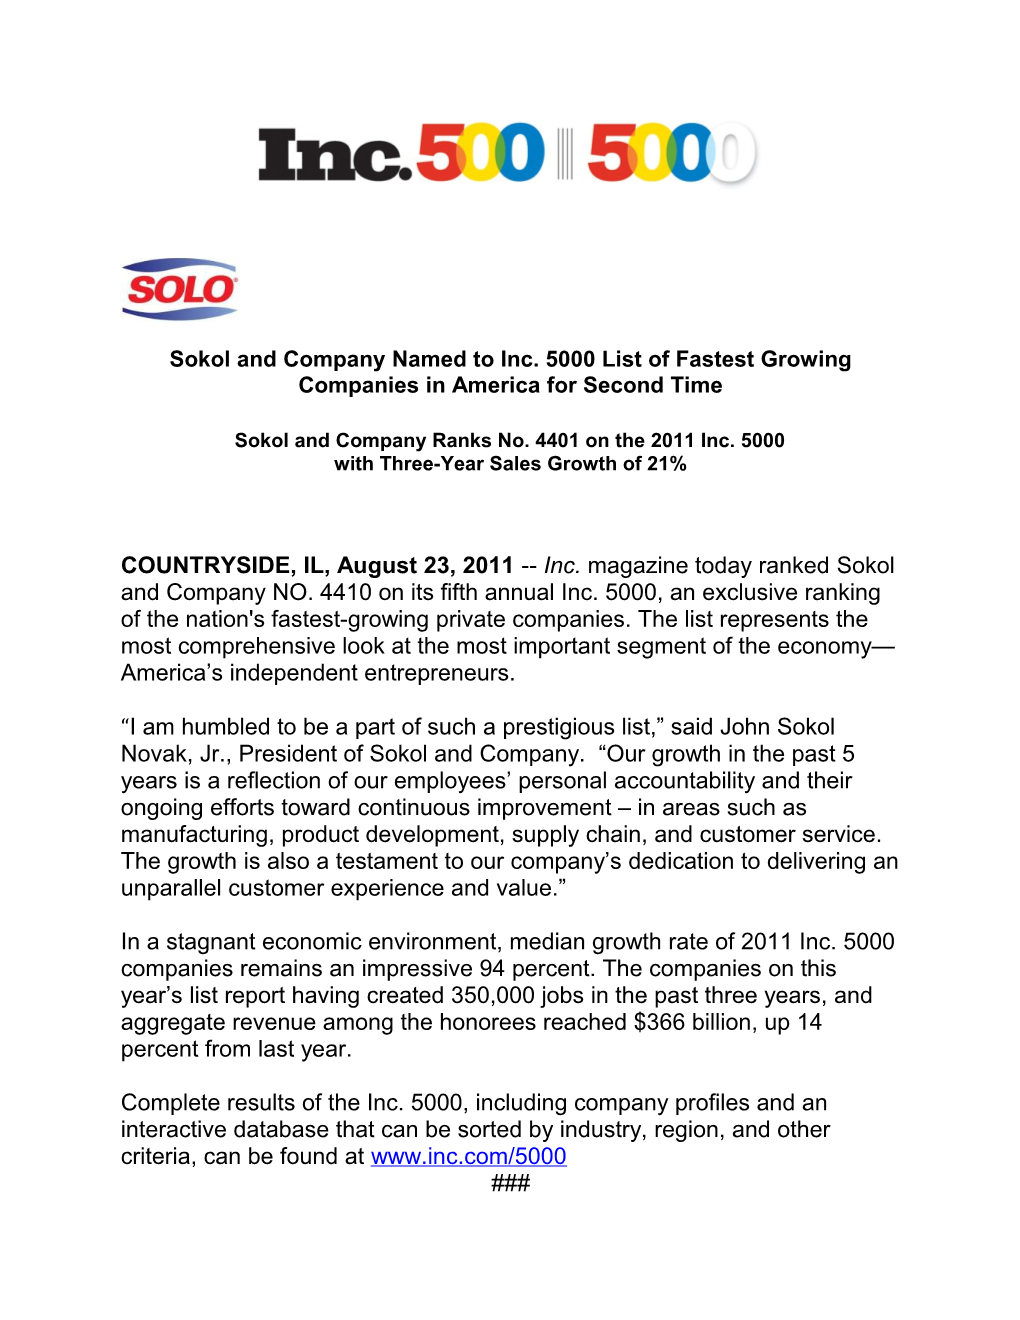 Sokol and Company Named to Inc. 5000 List of Fastest Growing Companies in America For